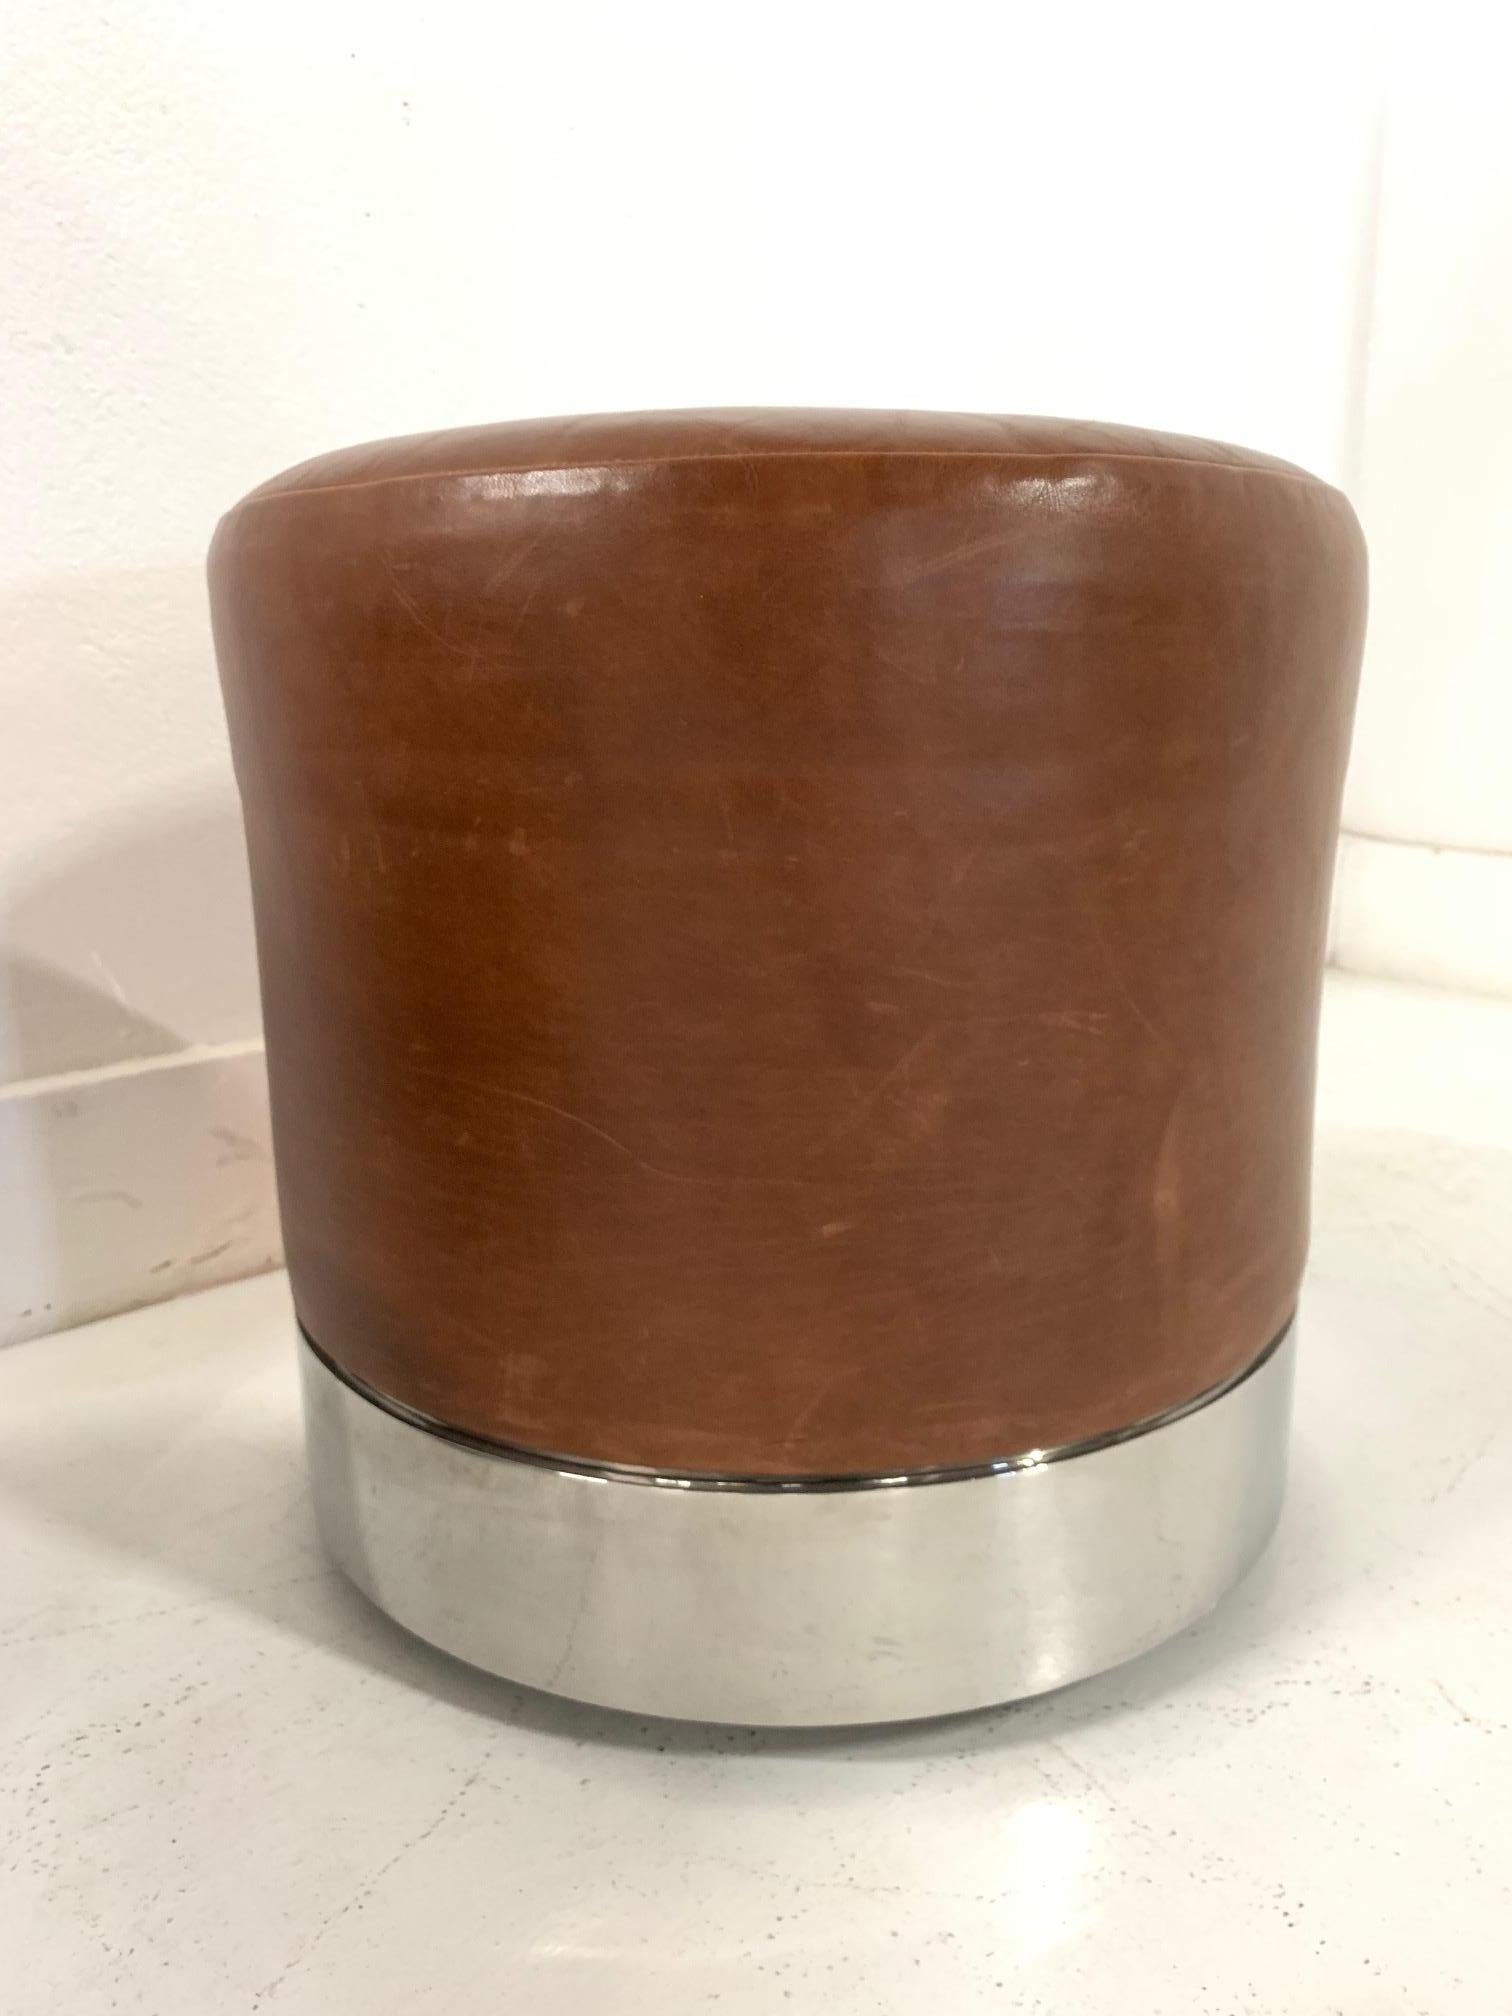 Two modern leather and polished chrome stools. Both stools have casters with a gently worn, cognac leather upholstery.